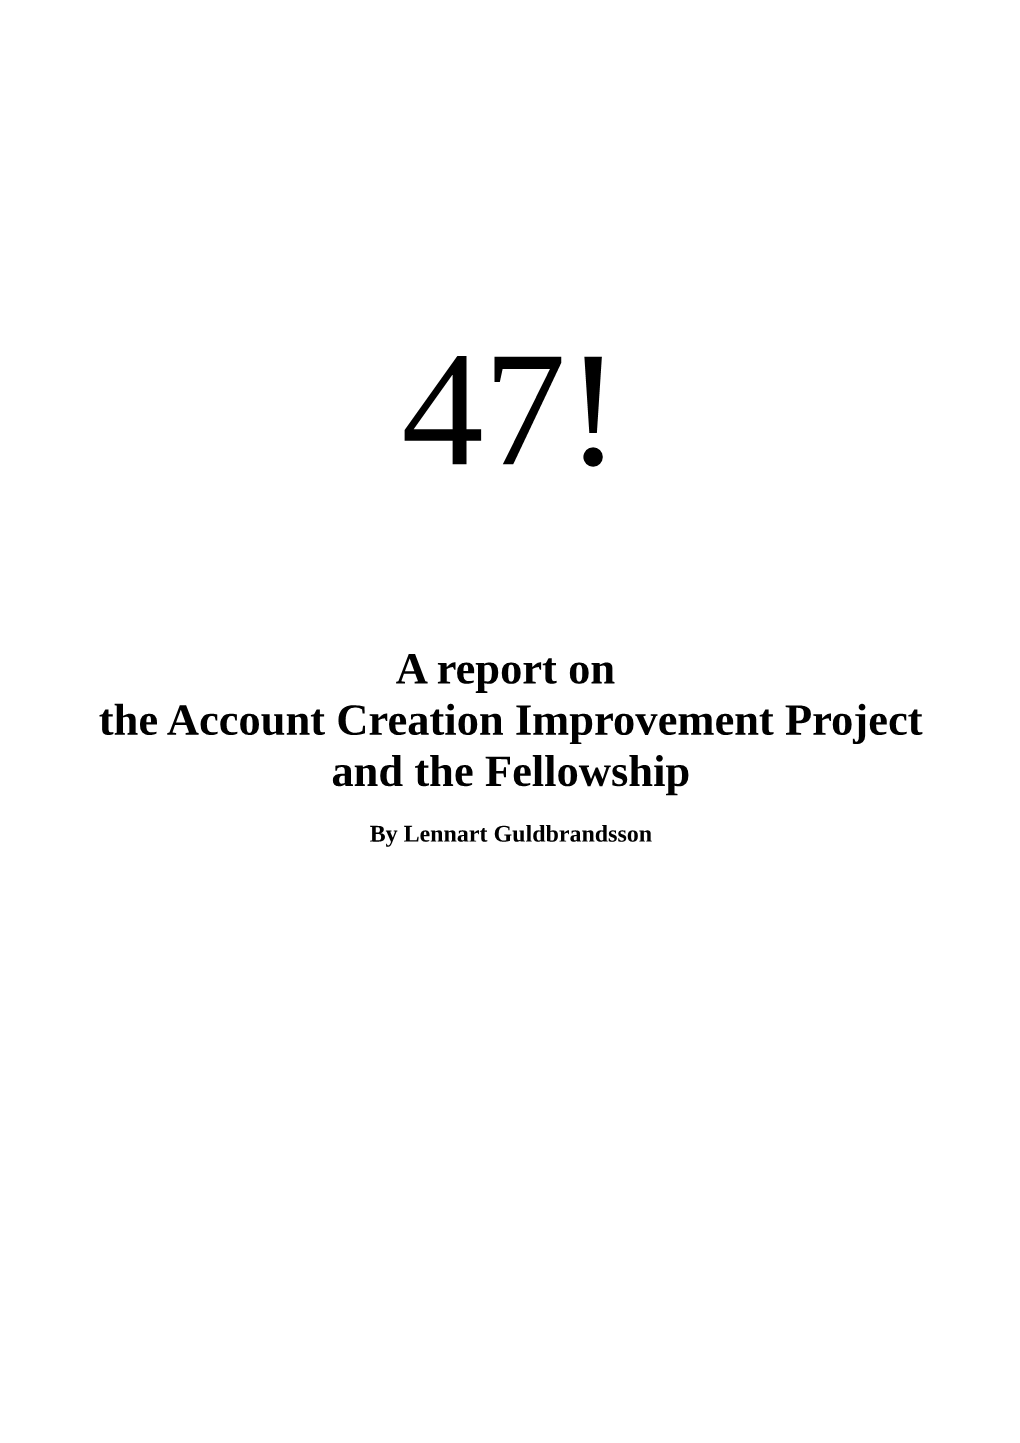 A Report on the Account Creation Improvement Project and the Fellowship